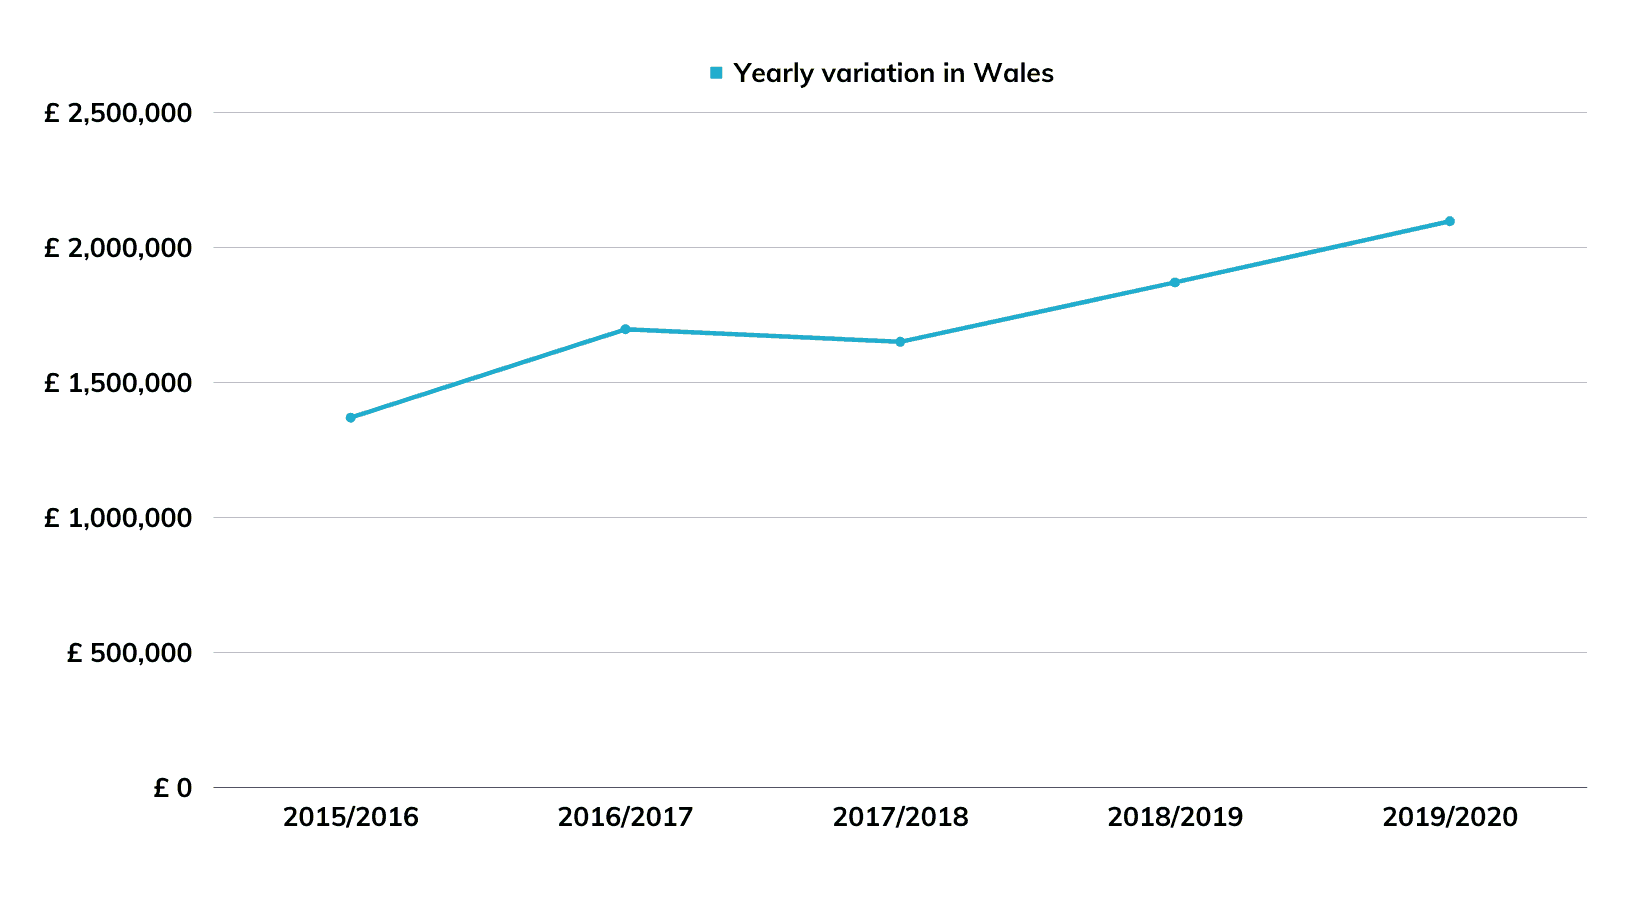 Figure 4 - Yearly variation in spending on translation and interpreting in Wales between 2015/2016 and 2019/2020